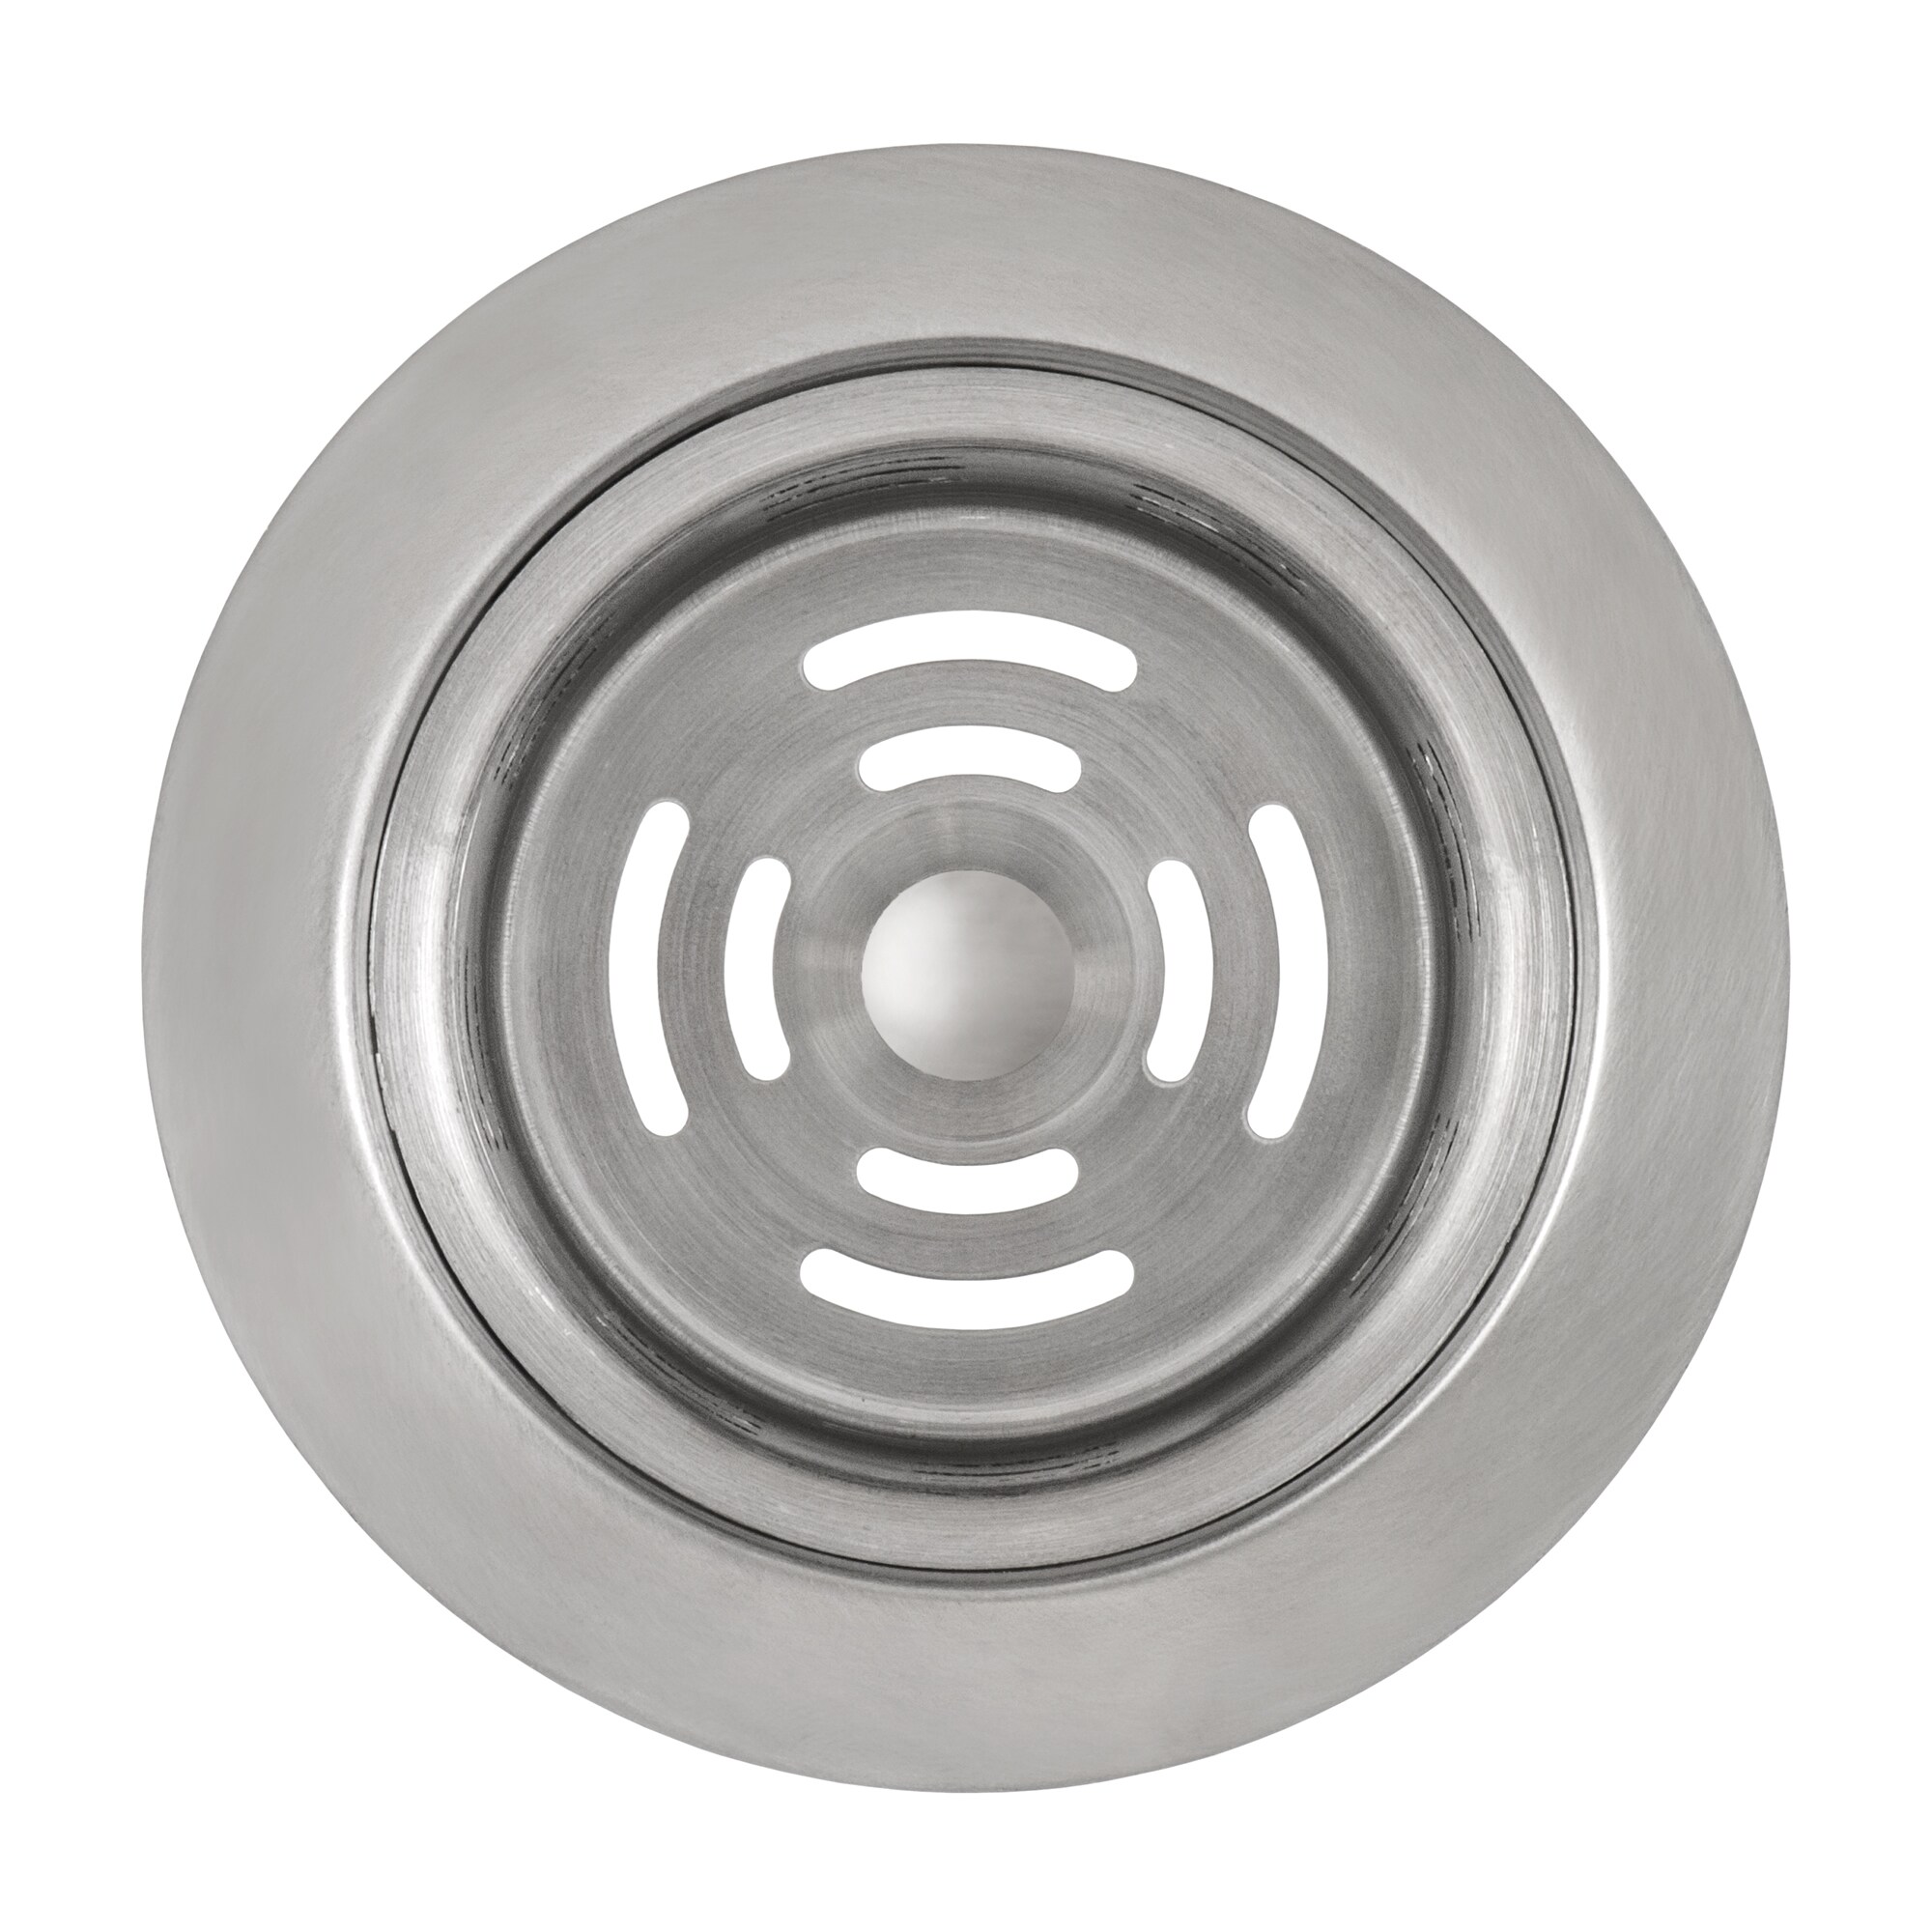 Ruvati Drain Cover for Kitchen Sink and Garbage Disposal - Brushed Stainless Steel - RVA1035